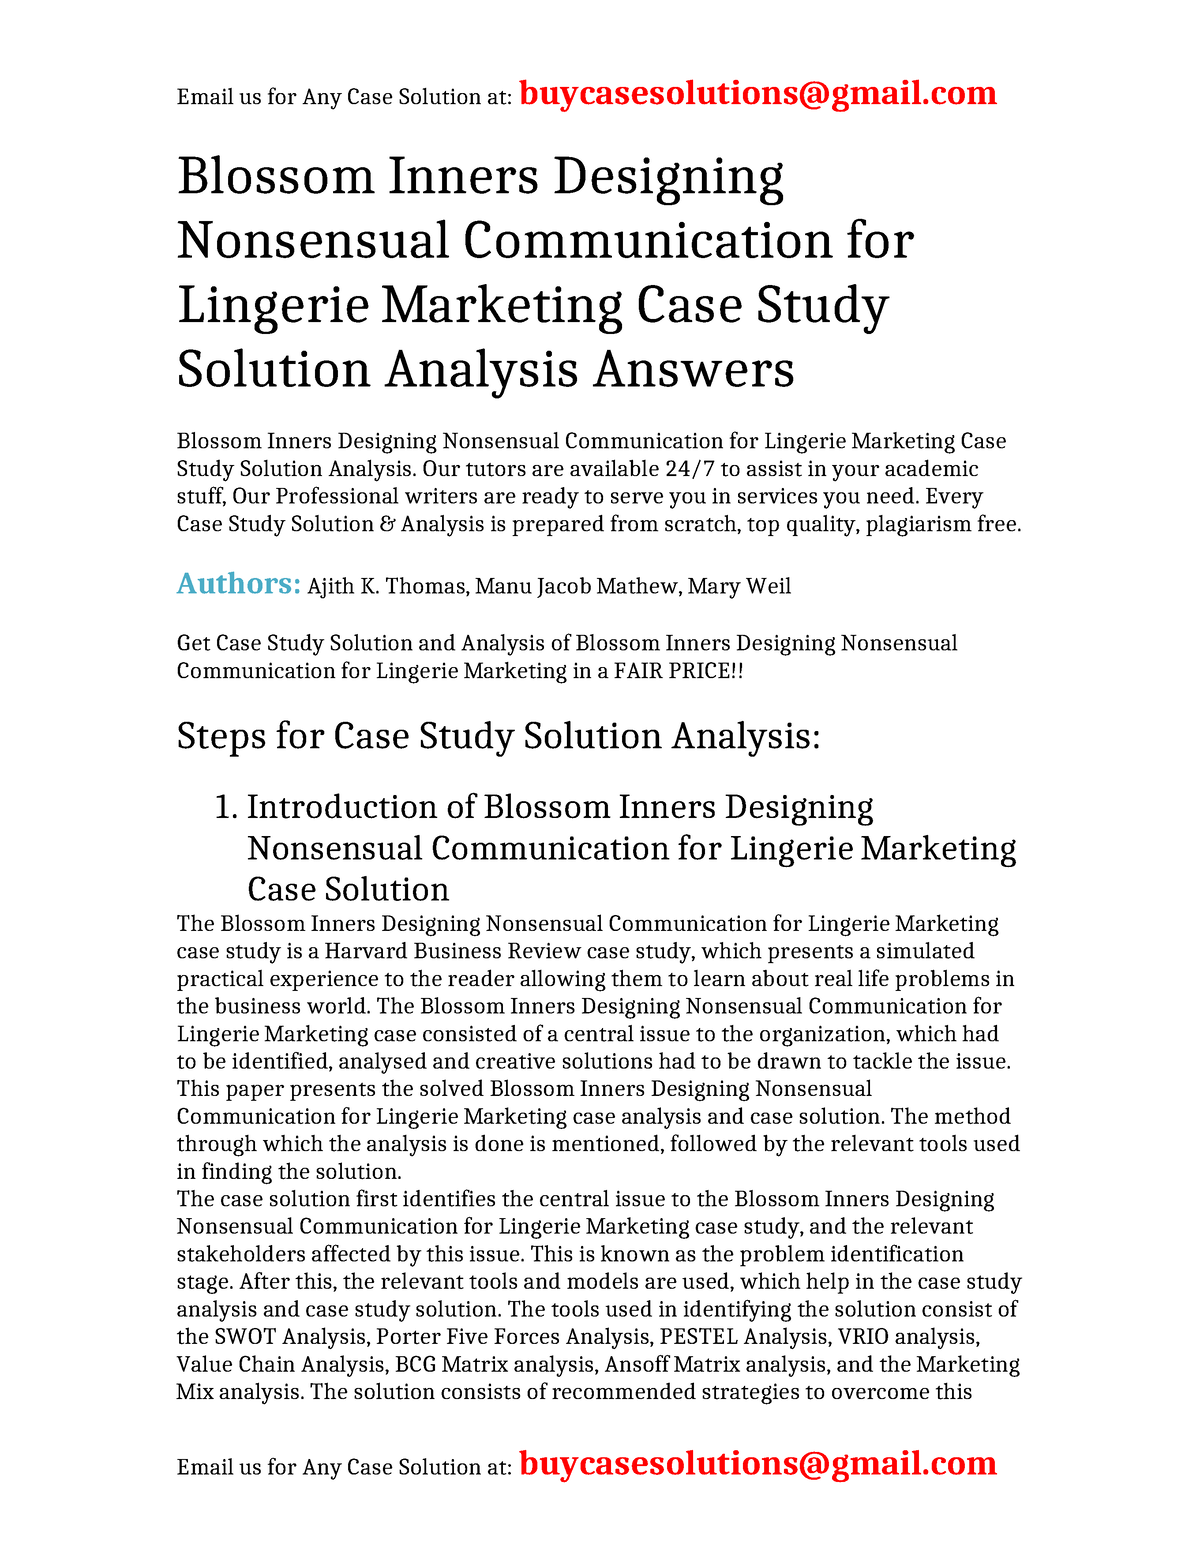 Case Solution Blossom Inners Designing Nonsensual Communication